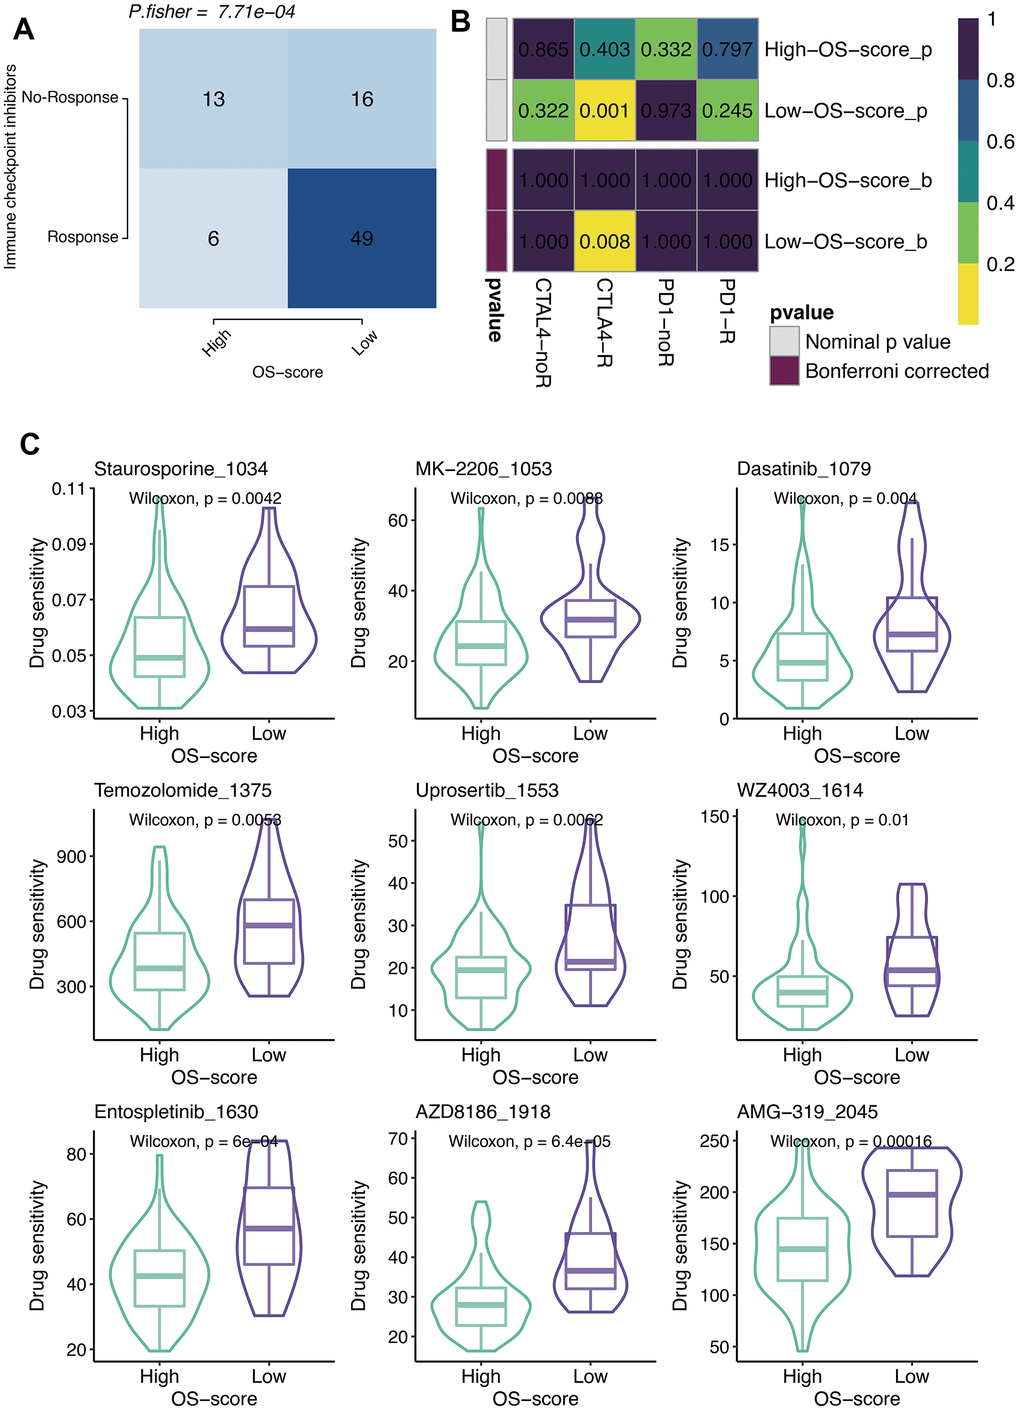 Immunotherapy and chemotherapy of OXS-signature for TARGET-OS. (A) Comparison of the ICB response rates between groups with high OS-scores or low OS-scores; (B) SubMap analysis for OXS-signature in TARGET-OS; (C) Box plots of estimated IC50 for six chemotherapeutic agents in high- or low-OS-score groups, with green images representing the group with higher OS-scores, and purple images representing the group with lower OS-scores.